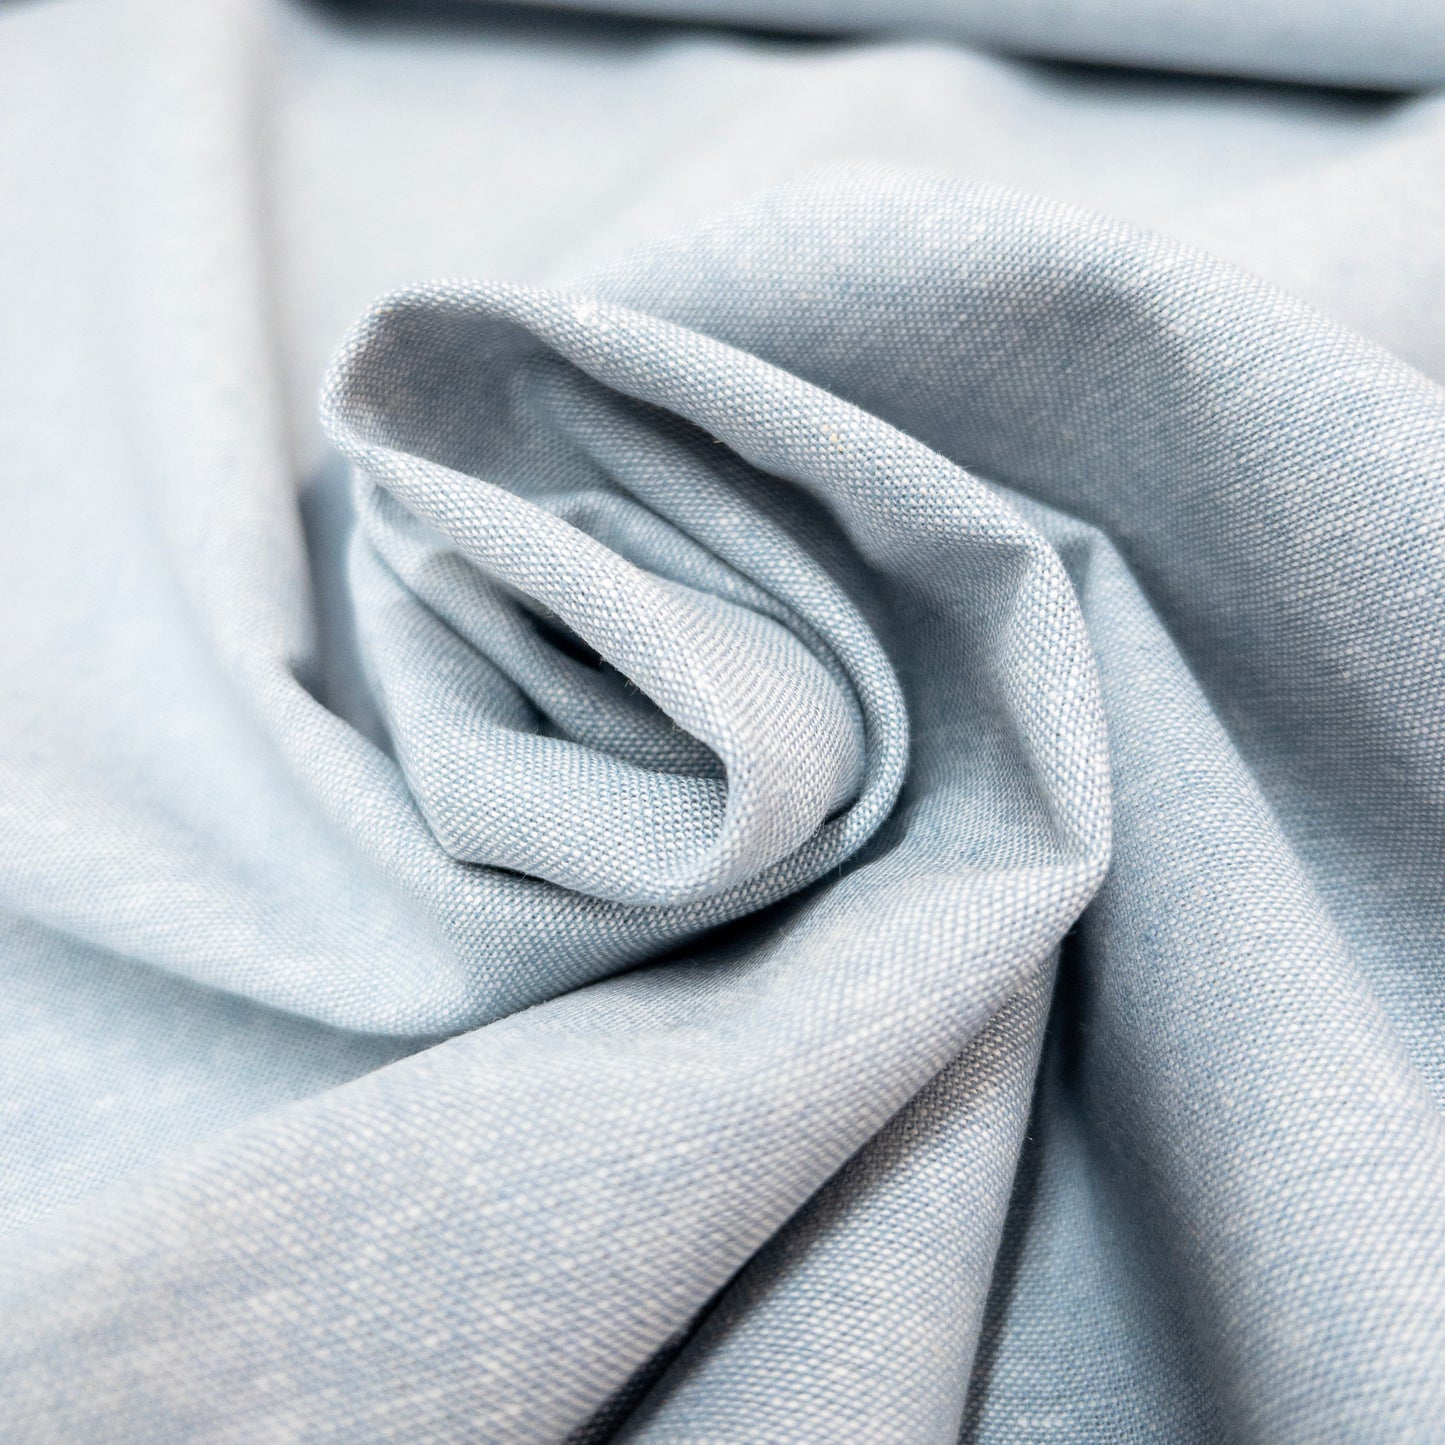 Essex Cotton Linen Blend in Chambray